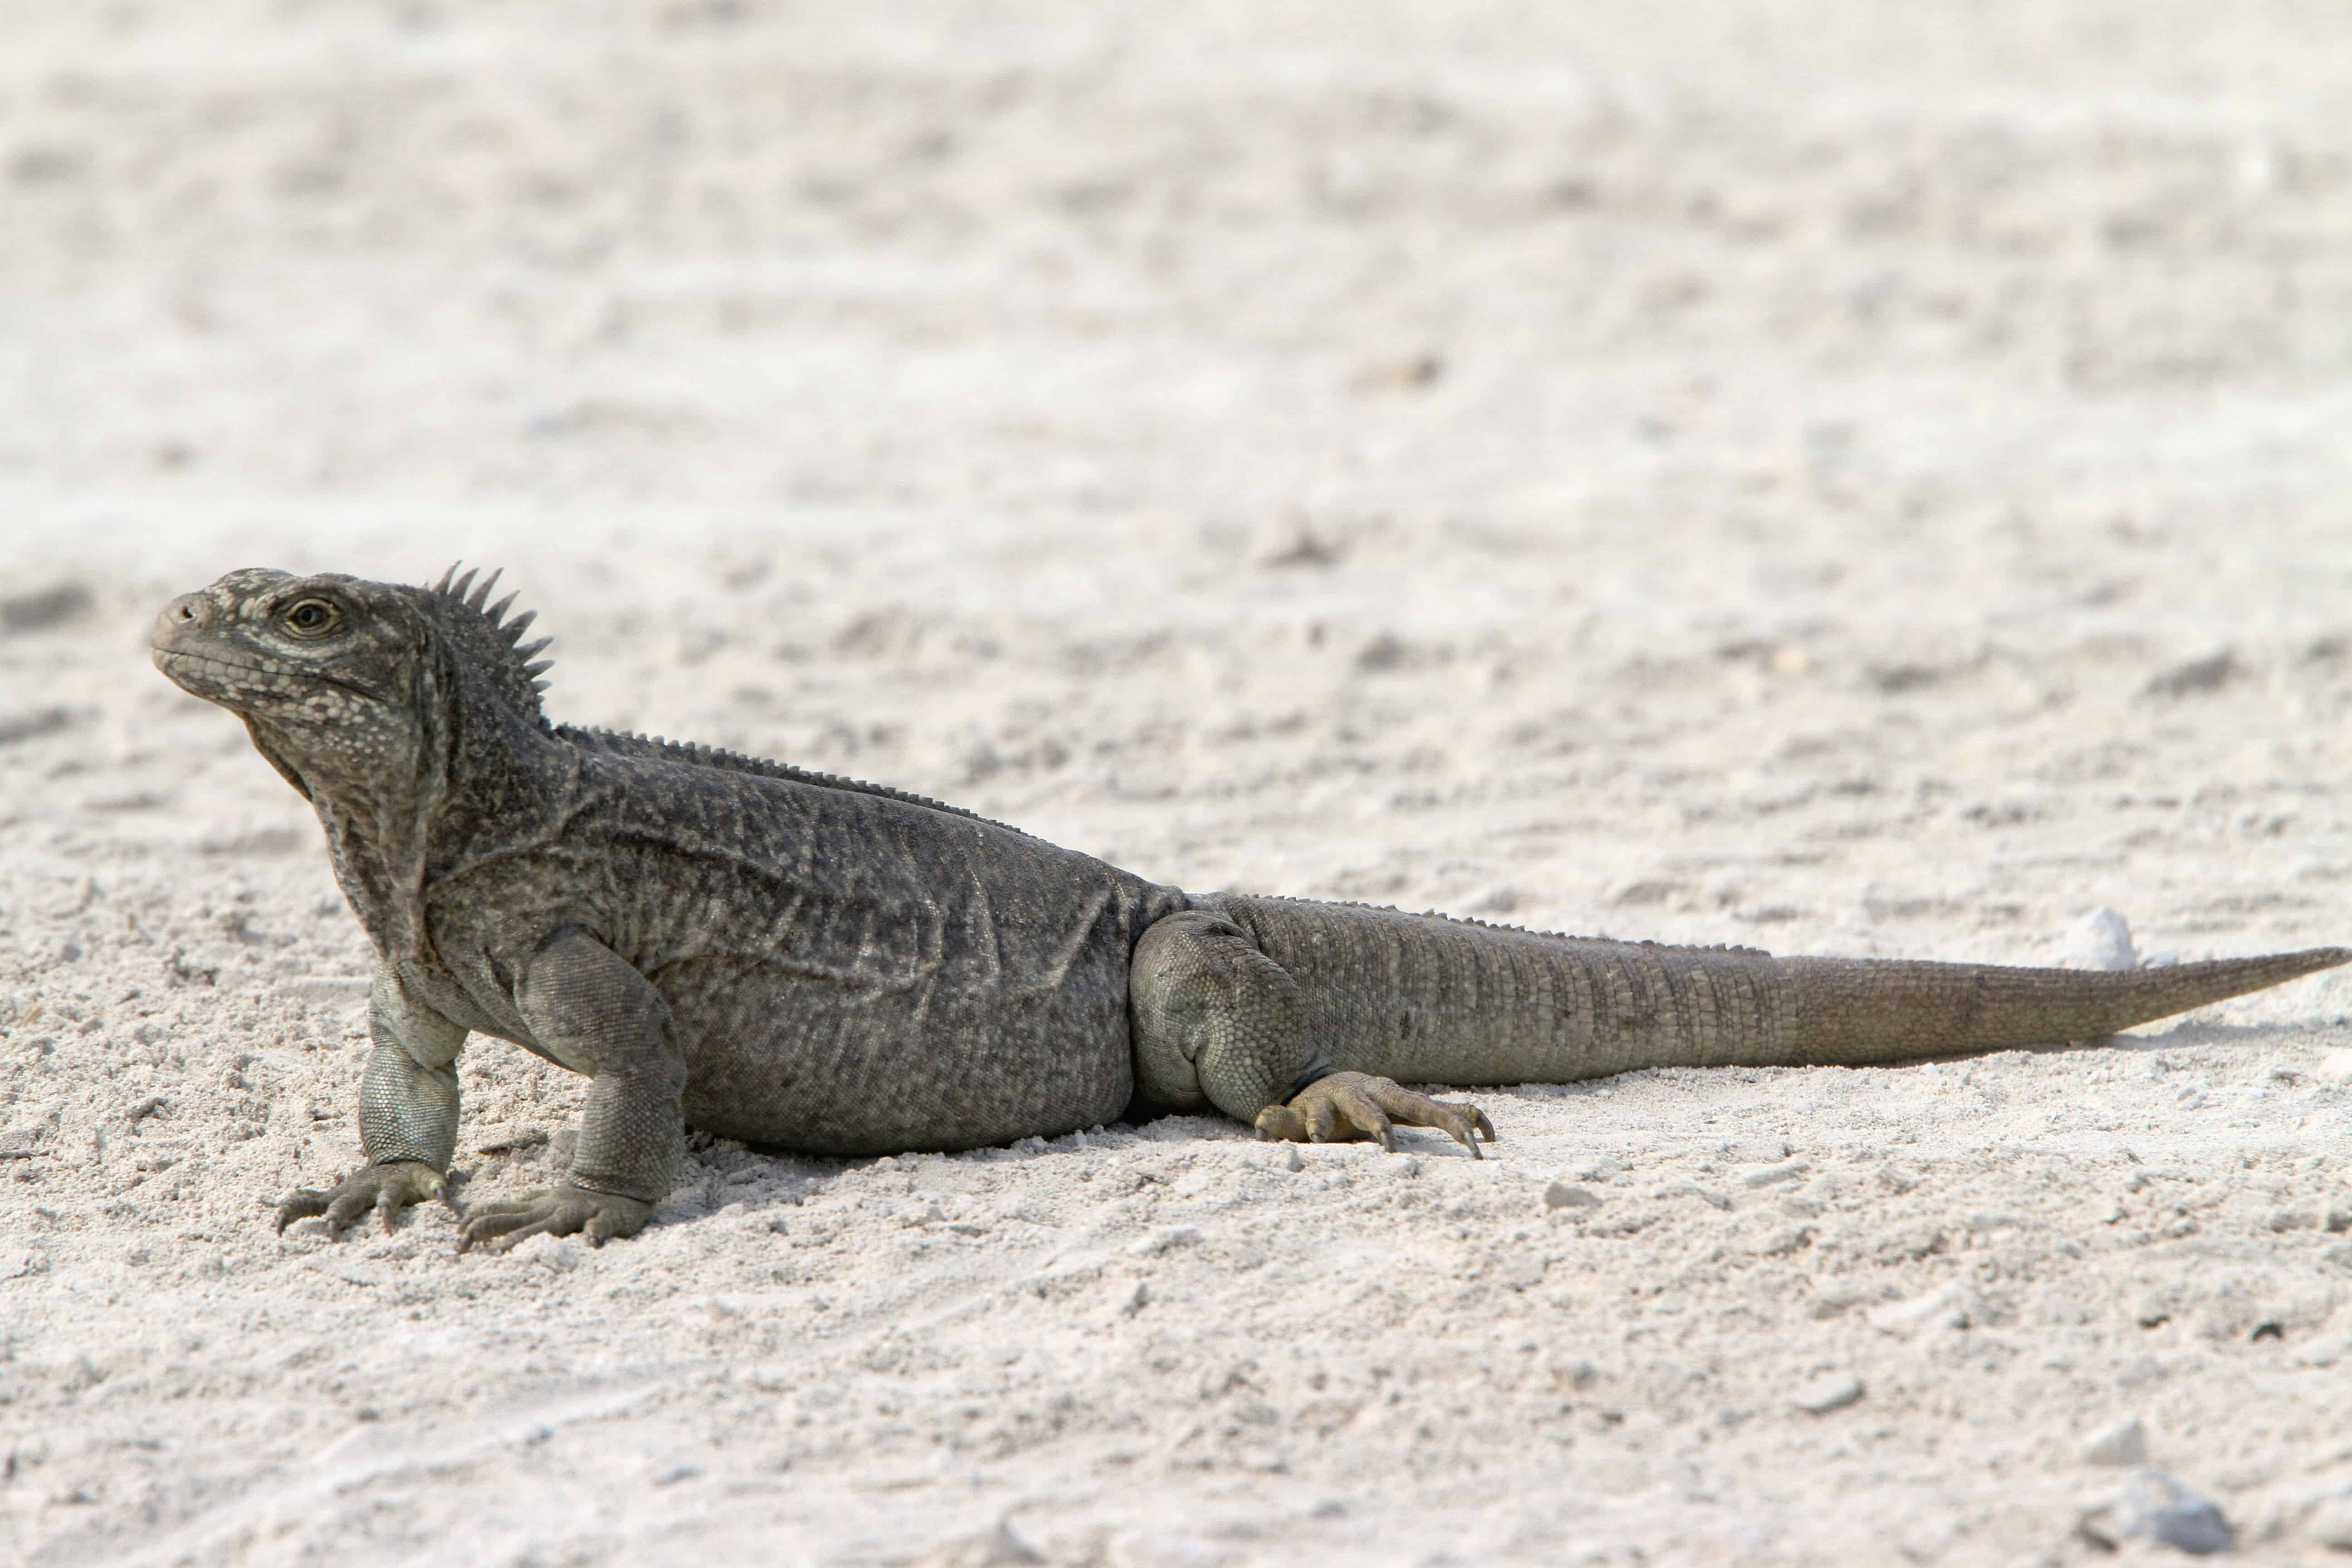 TCI rock iguana at Little Water Cay; Copyright: Dr Mike Pienkowski